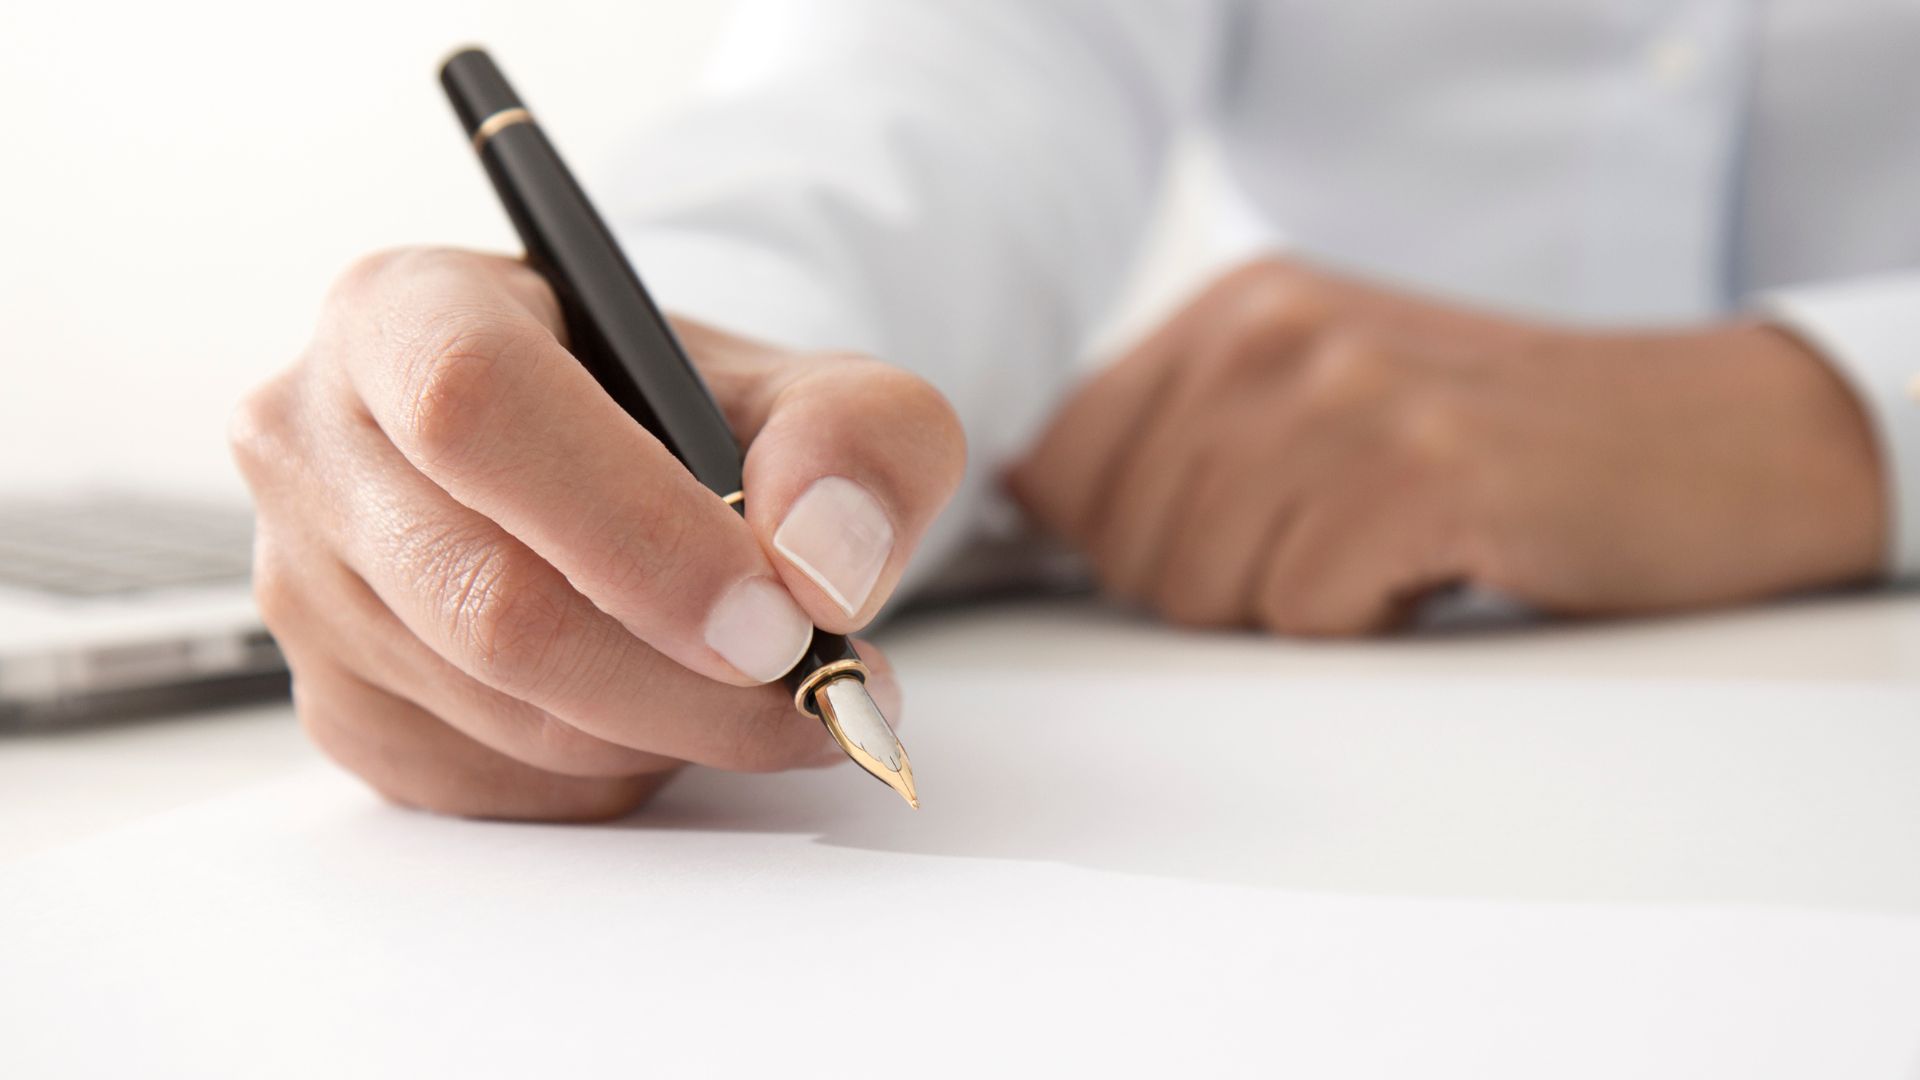 A hand holding a pen, getting ready to sign document